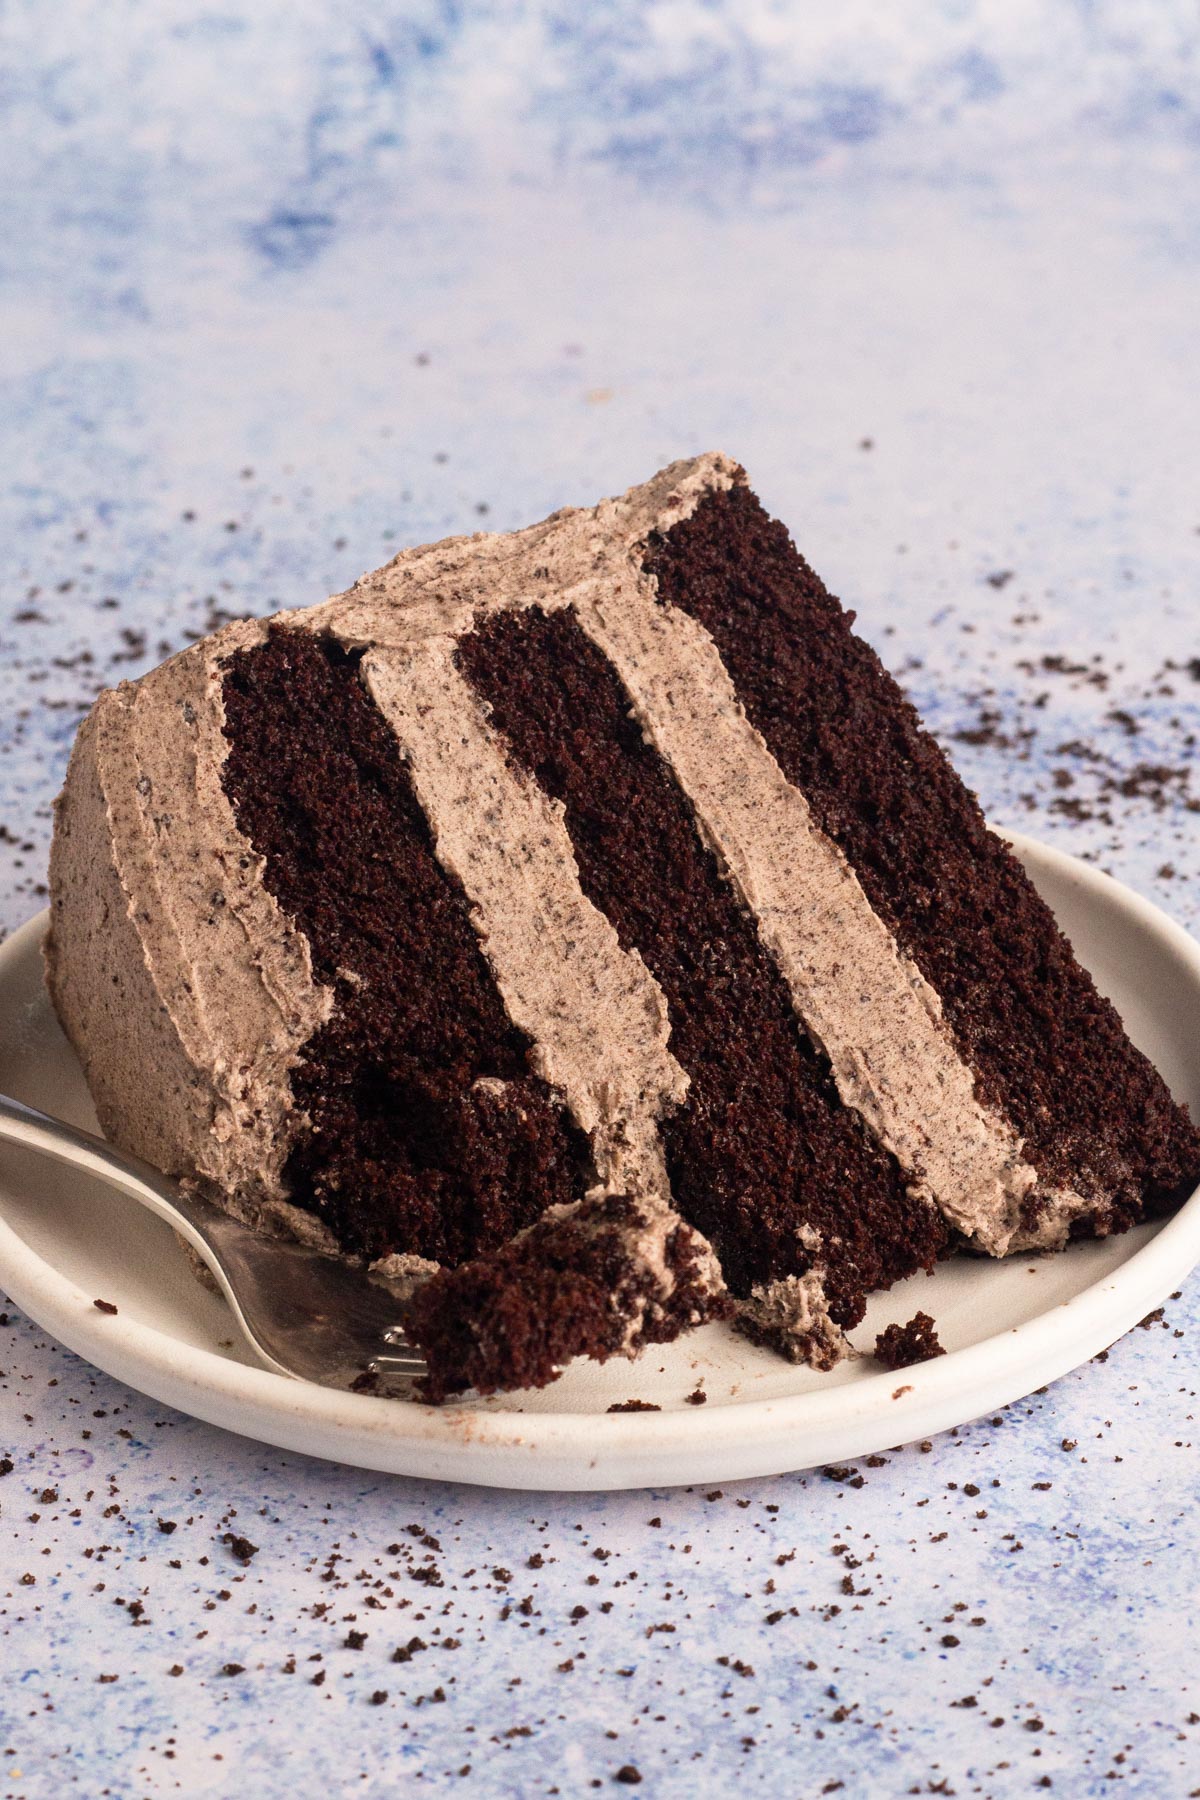 A side view of a slice of chocolate layer cake with Oreo buttercream on a white plate. A fork is laying next to the cake on the plate holding a forkful of cake and frosting.